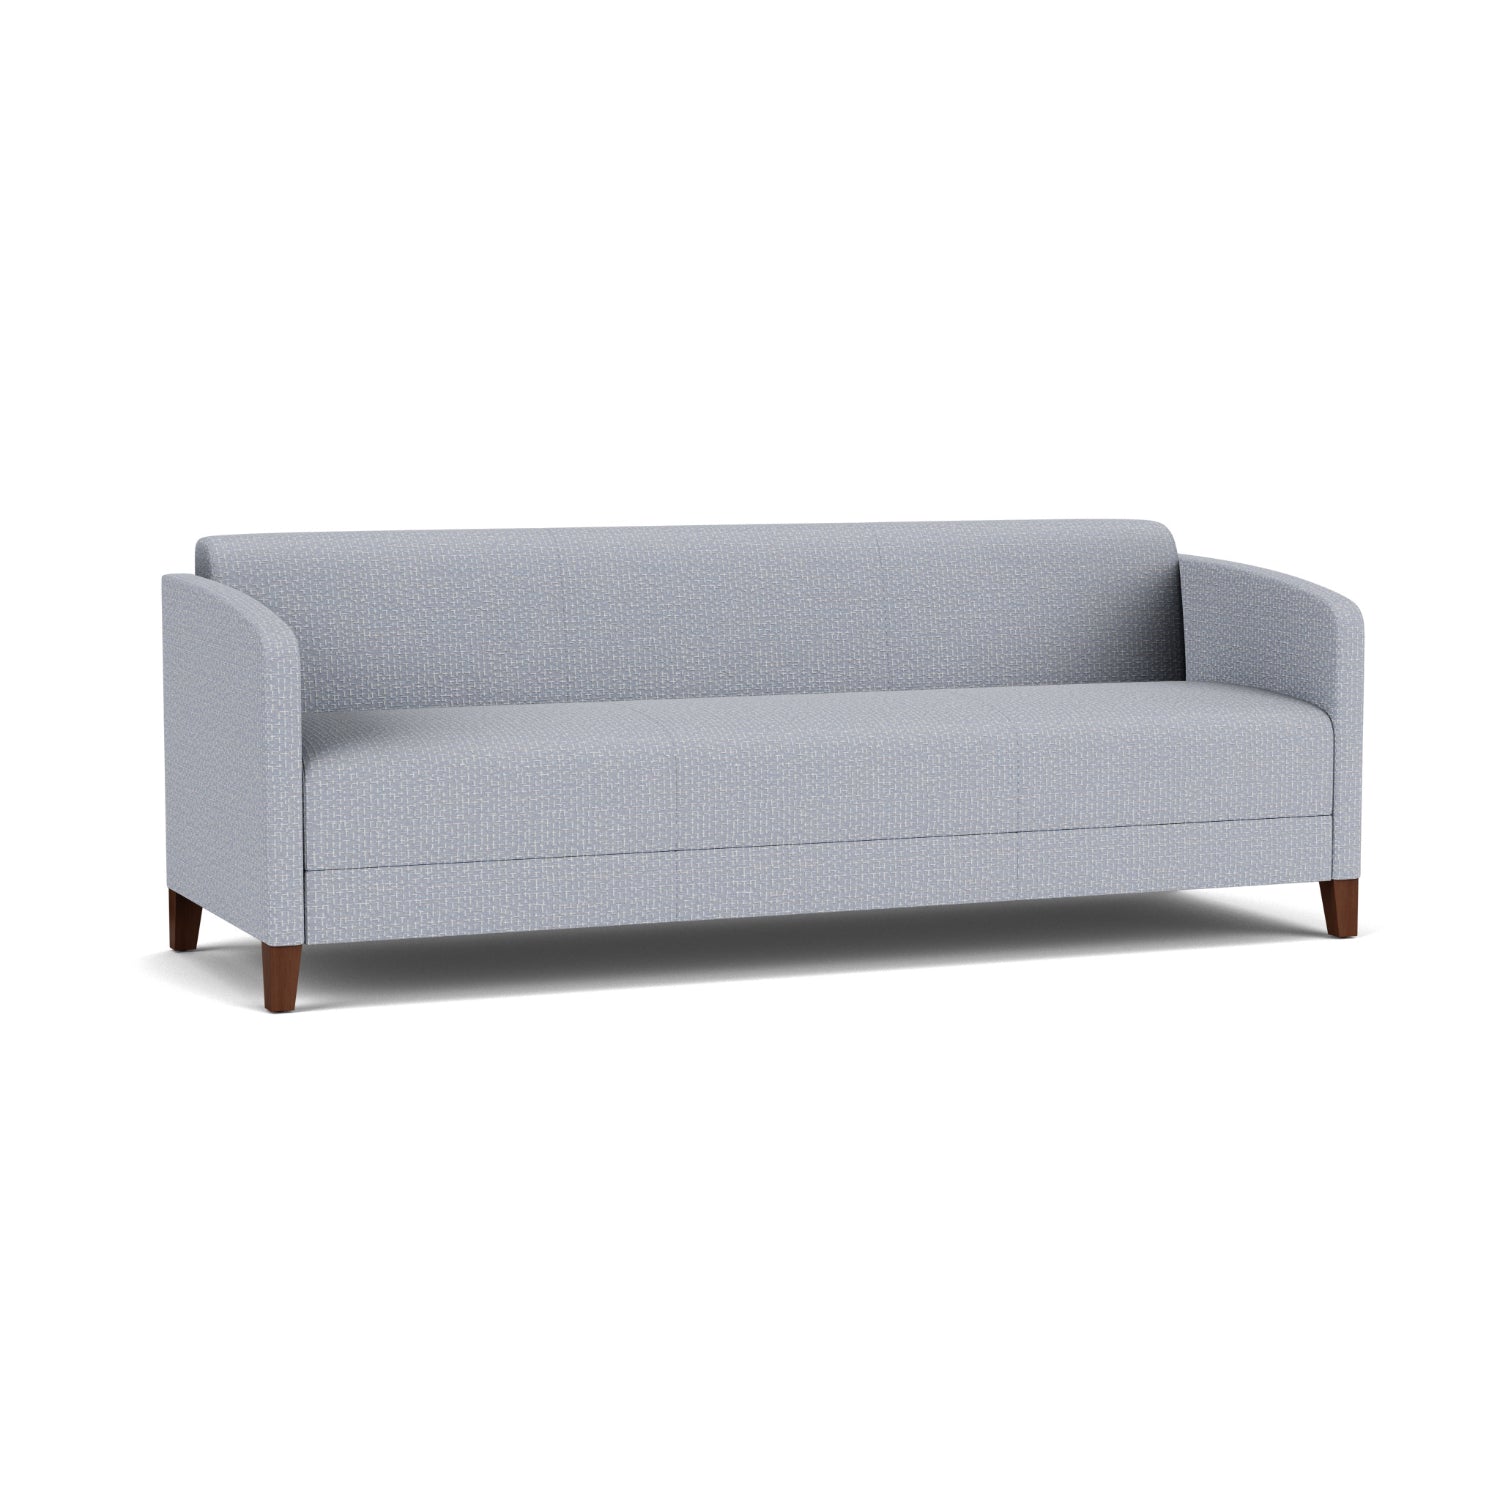 Fremont Collection Reception Seating, Sofa, Designer Fabric Upholstery, FREE SHIPPING